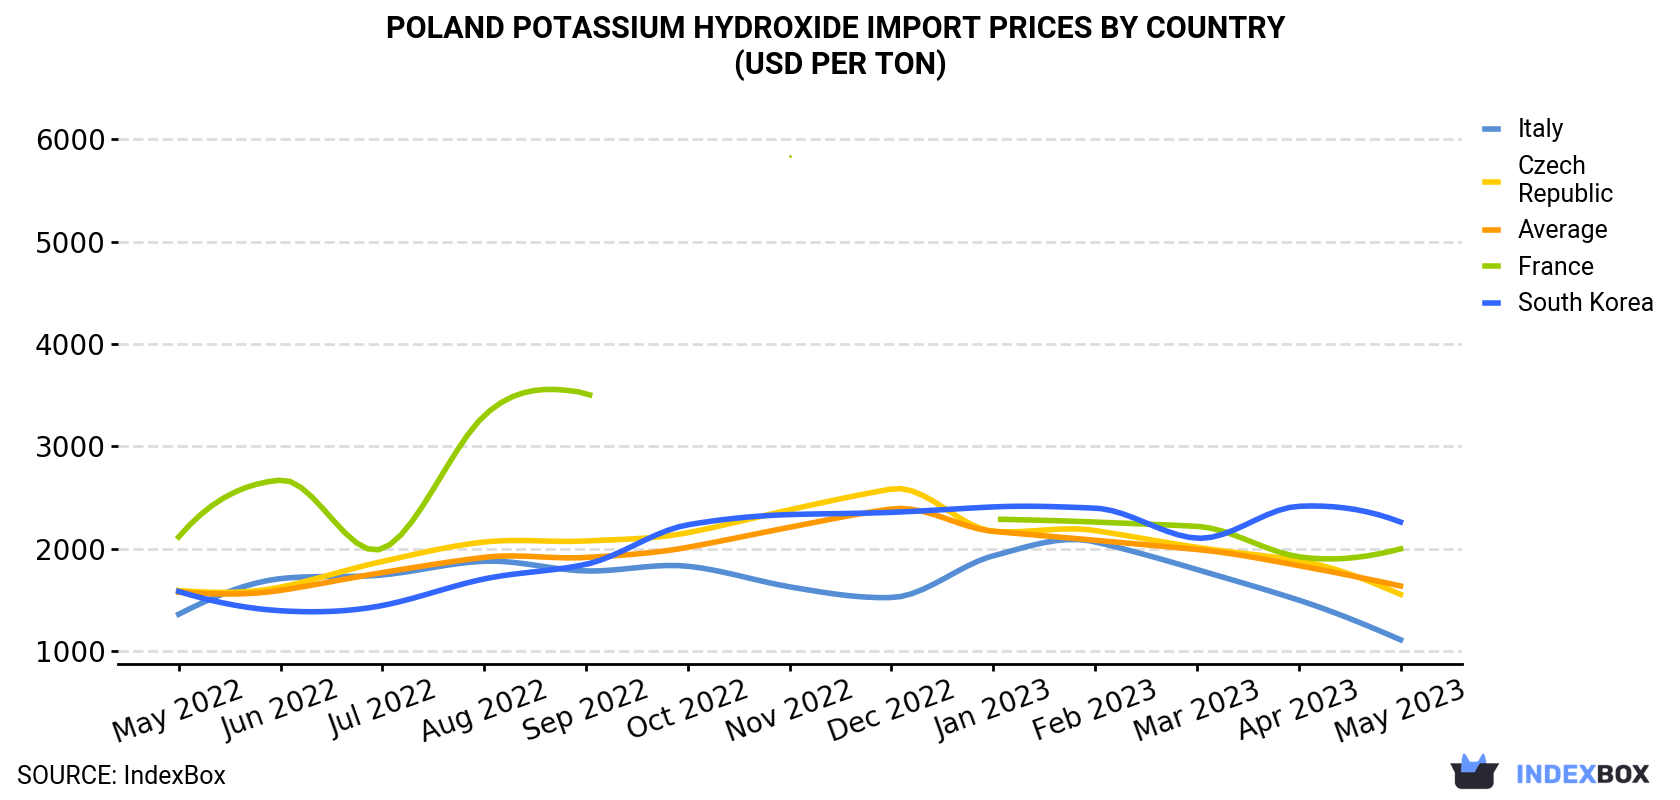 Poland Potassium Hydroxide Import Prices By Country (USD Per Ton)